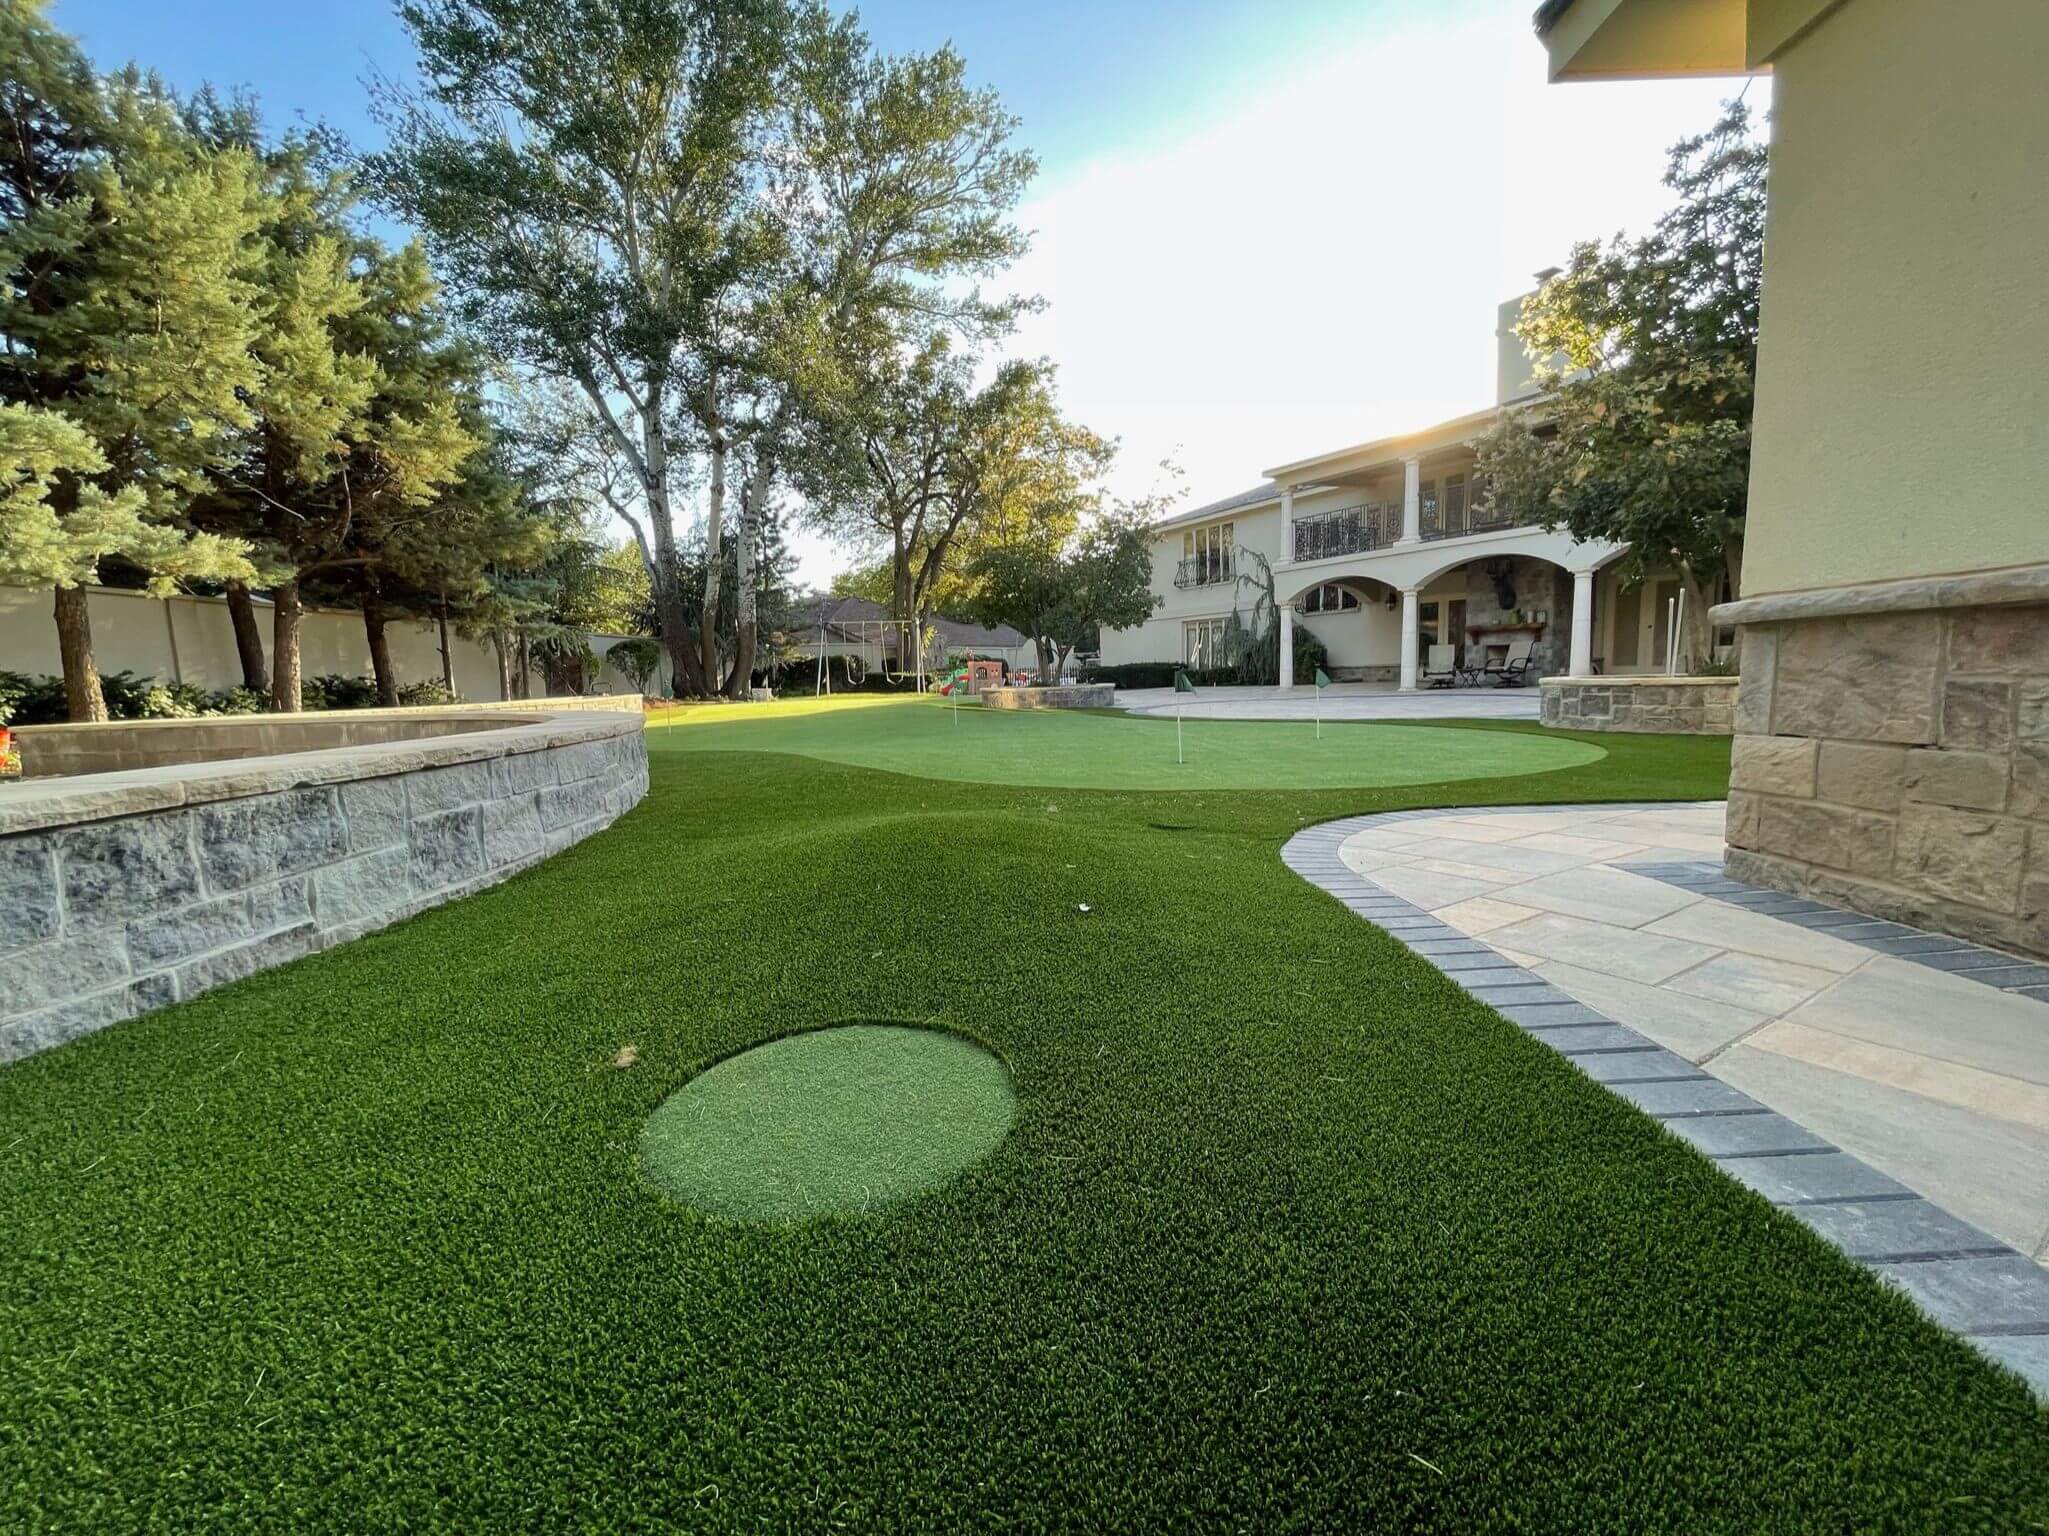 Backyard putting green installed by Premiere Greens